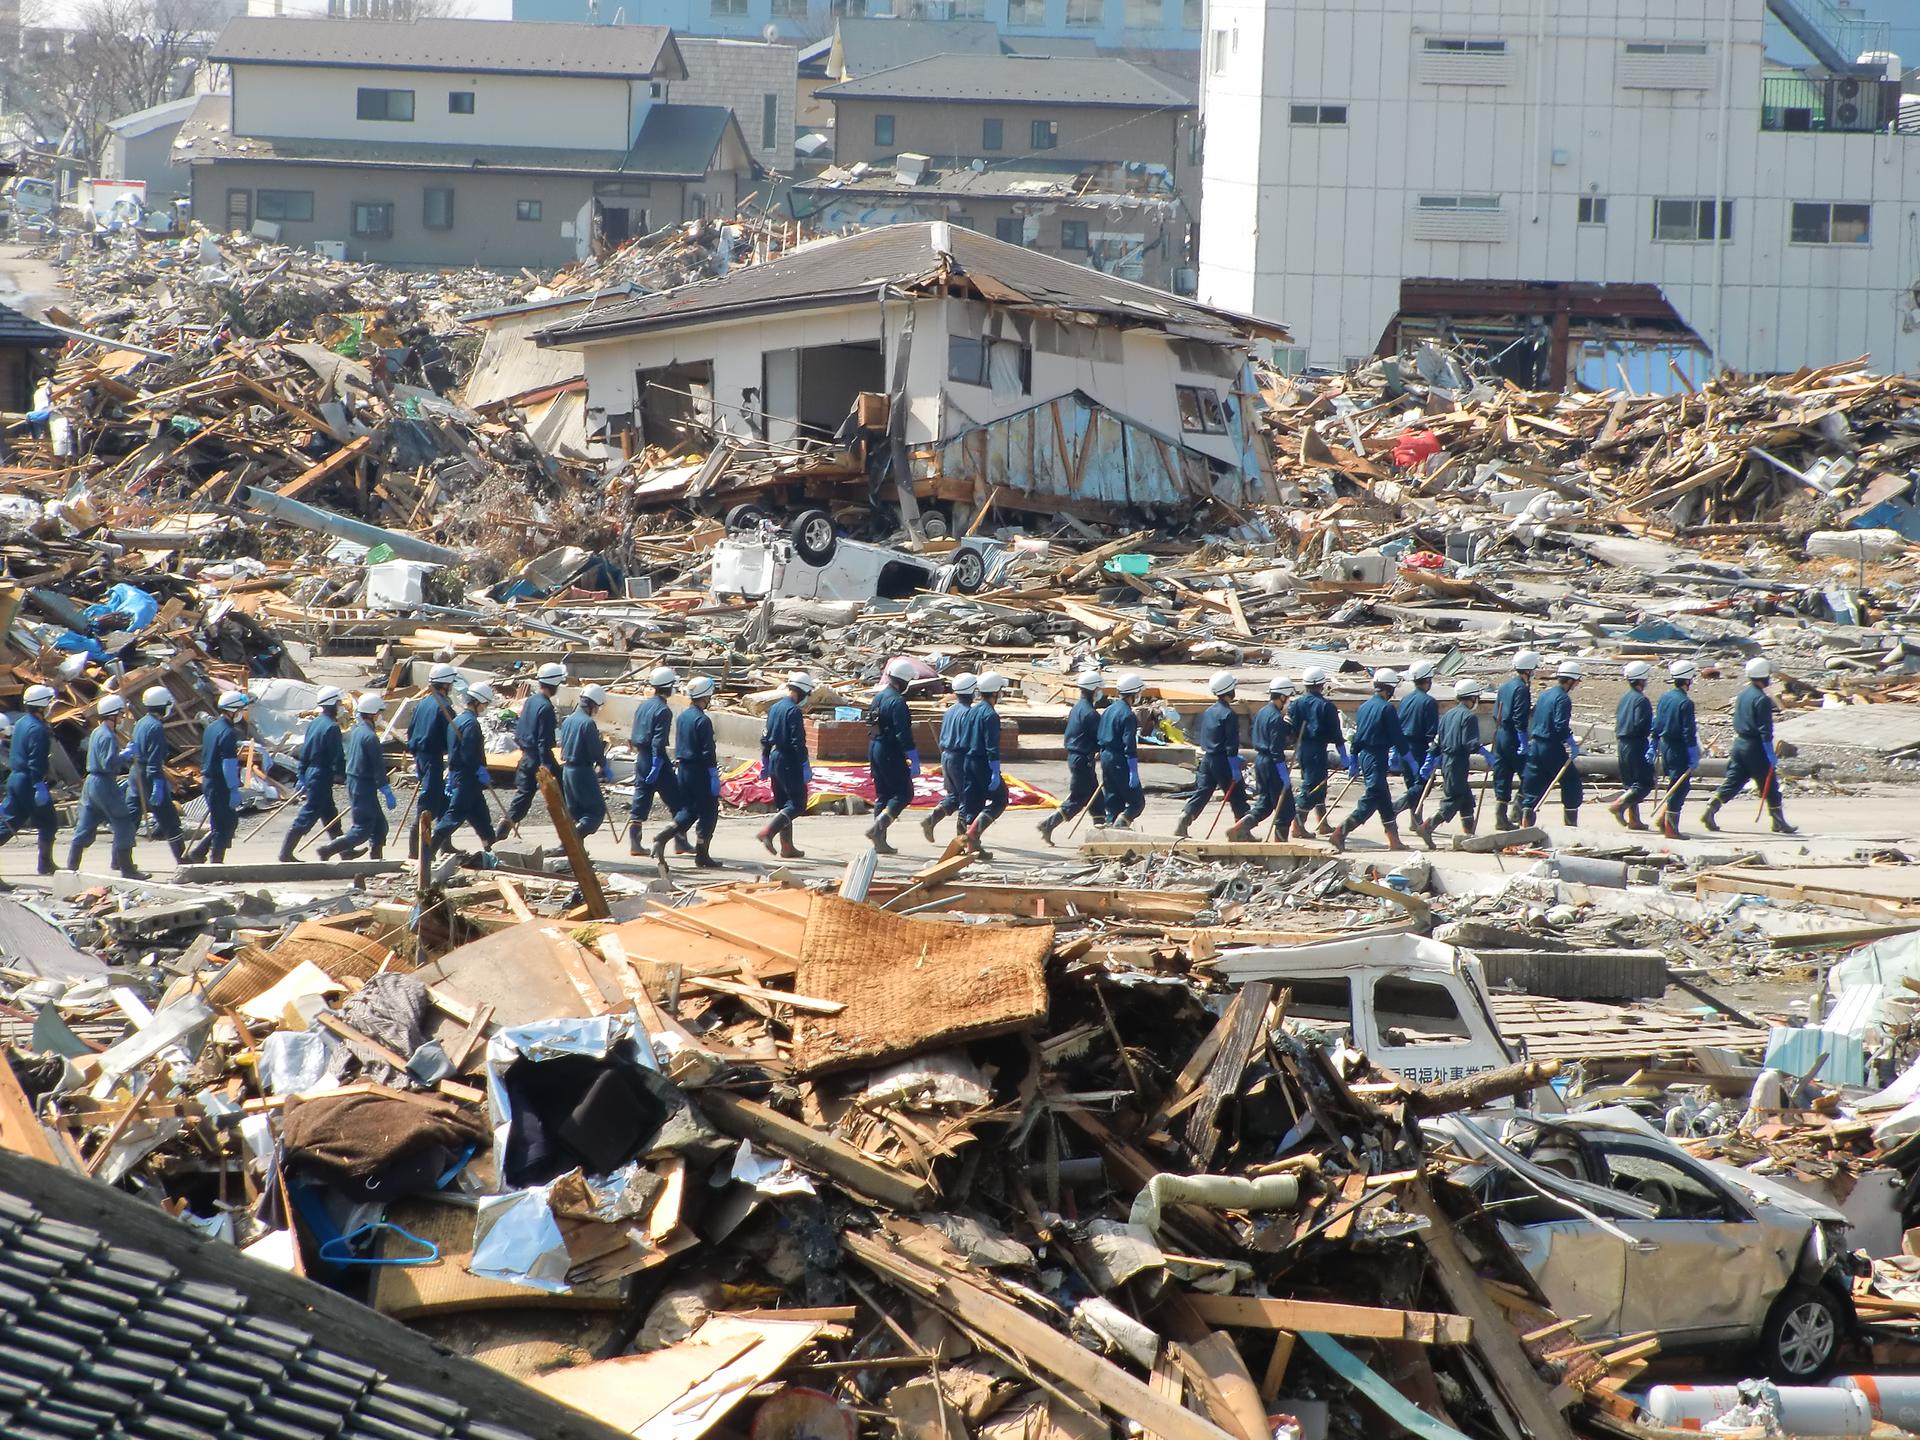 A long line of Japan's Self Defense Forces are shown wearing blue protective outfits and walking among the rubble of Ishinomaki.